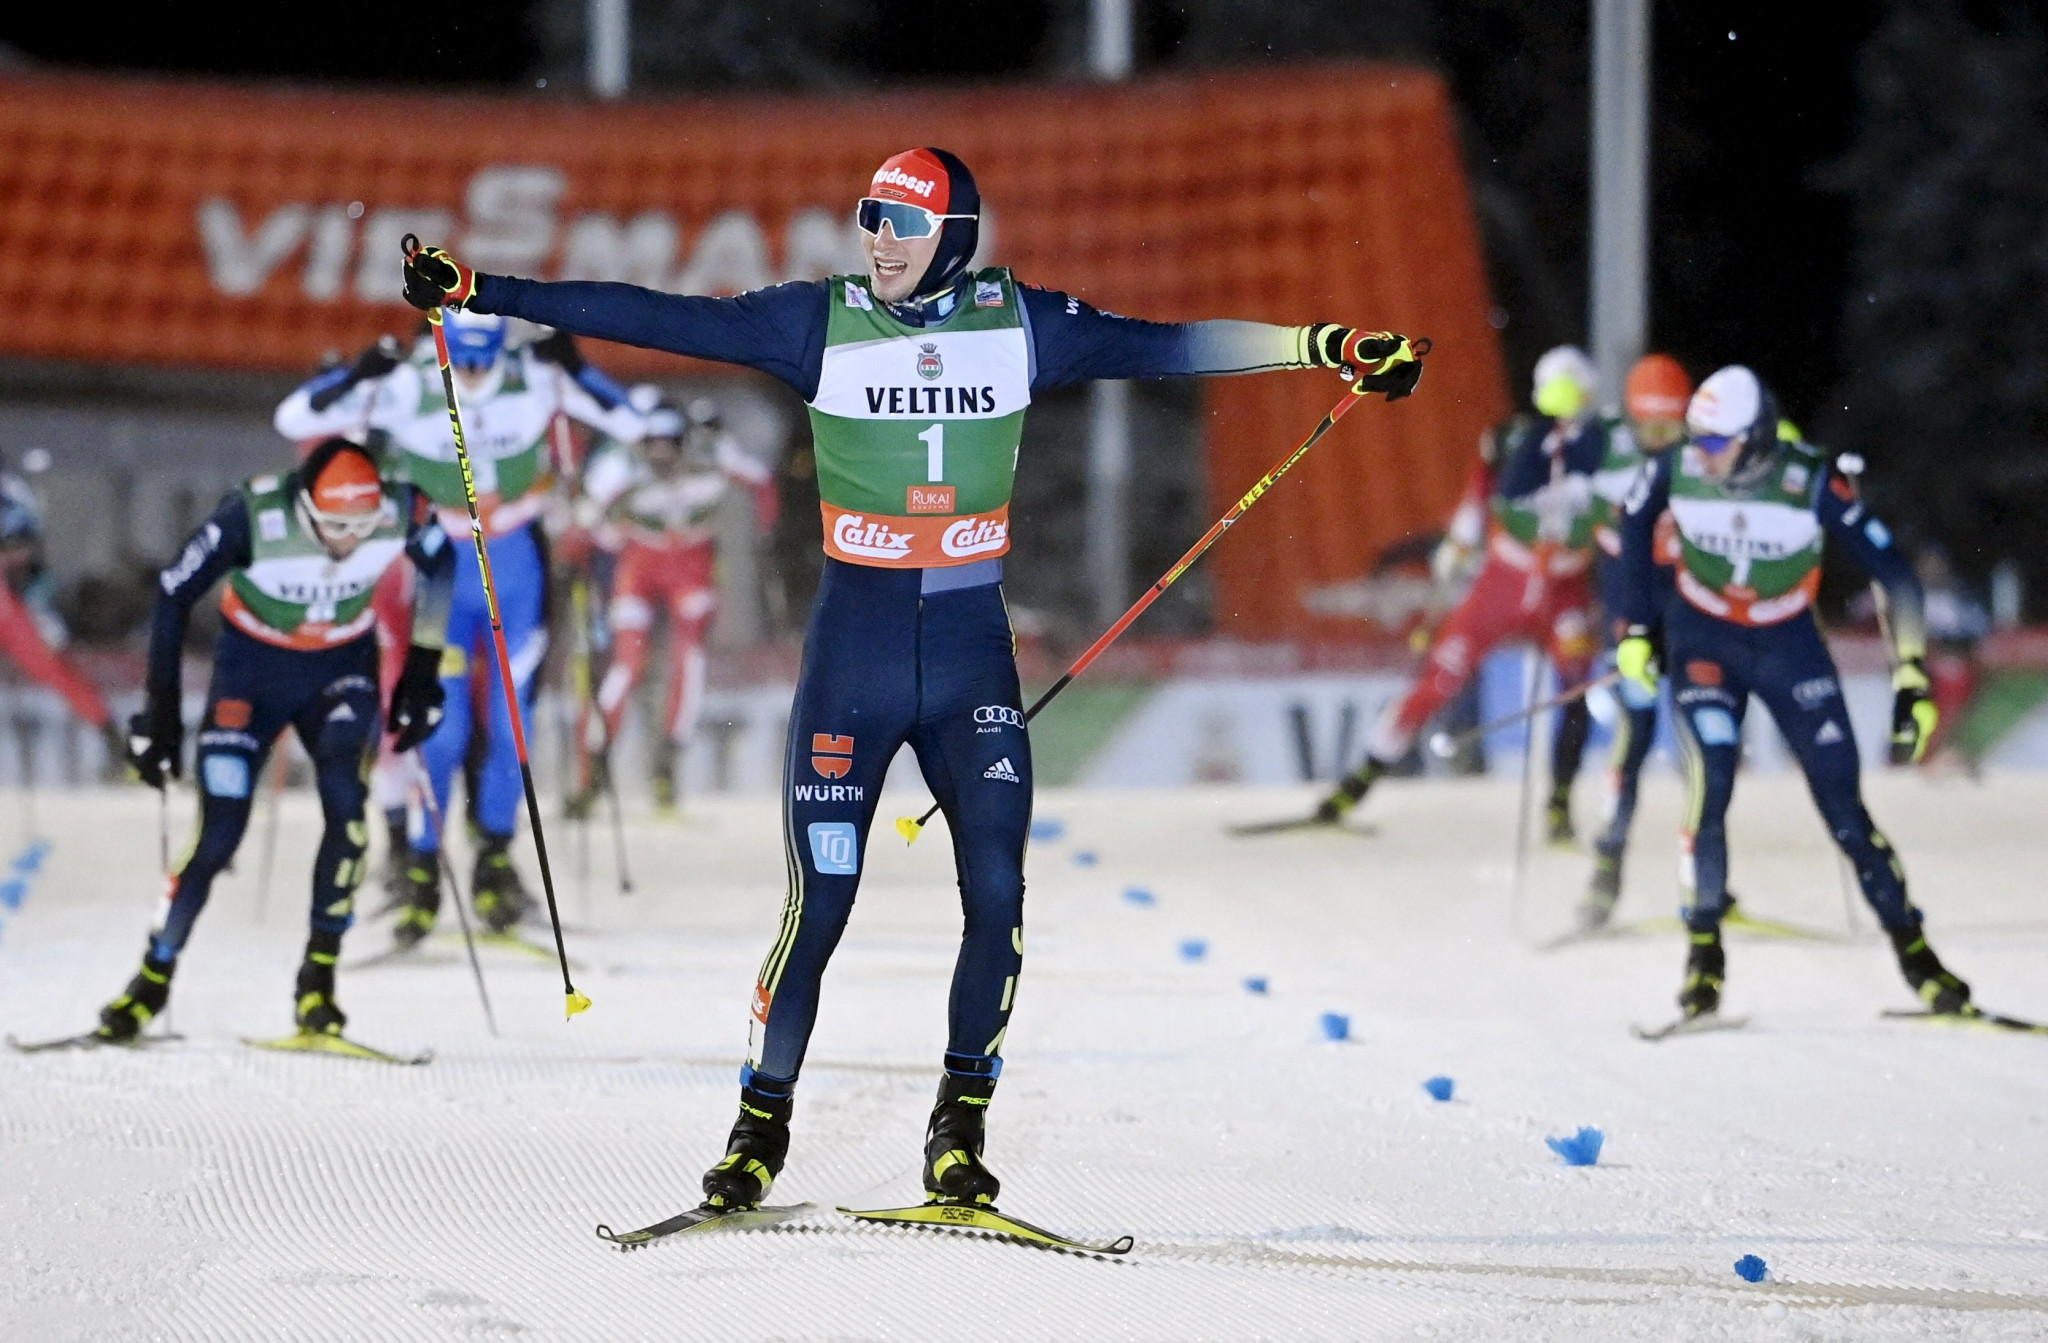 Terence Weber celebrates after winning his first World Cup title in Ruka ©Getty Images